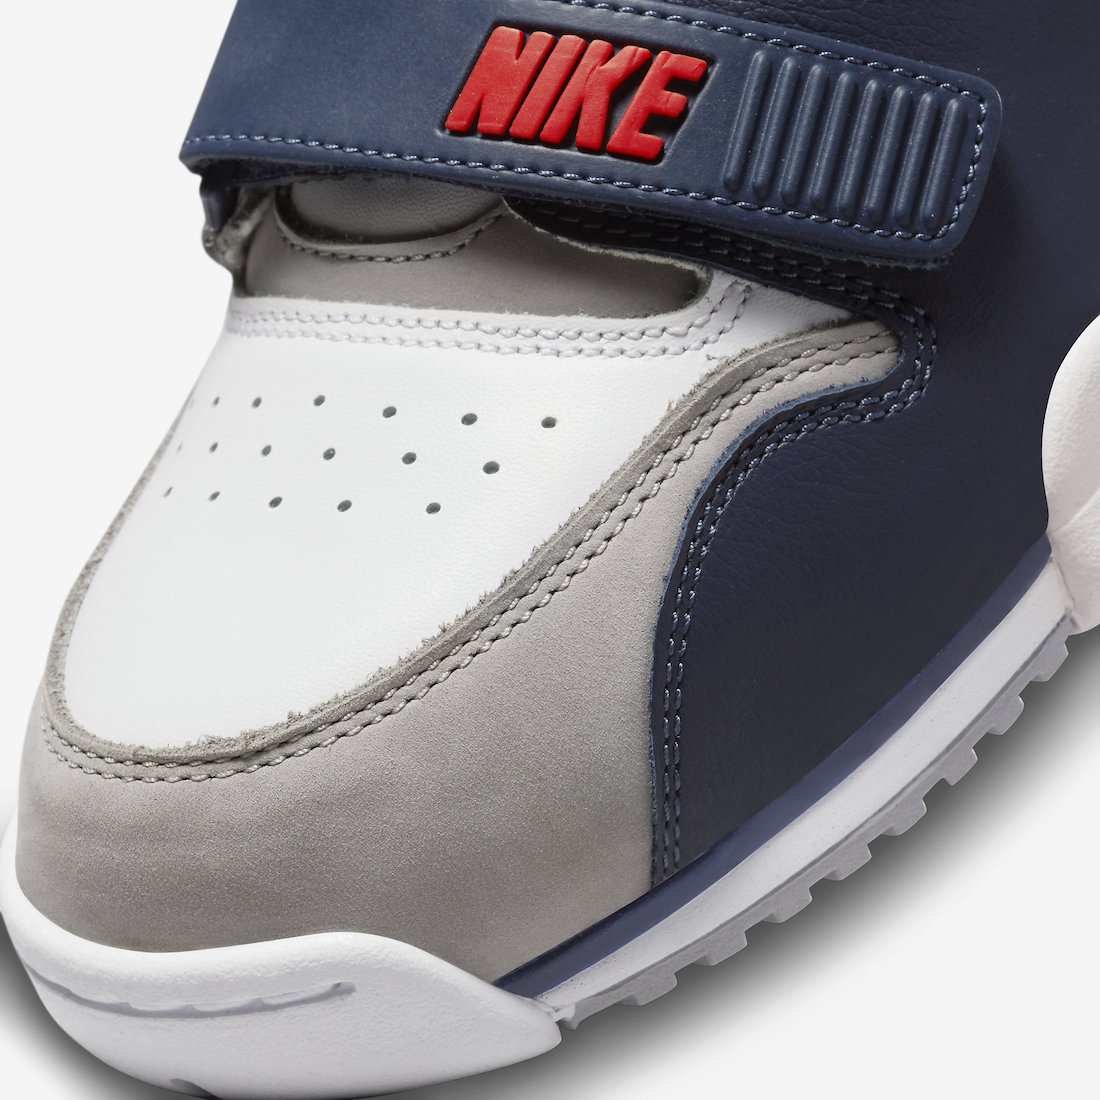 Nike Air Trainer 1 Midnight Navy DM0521-101 2022 Release Date